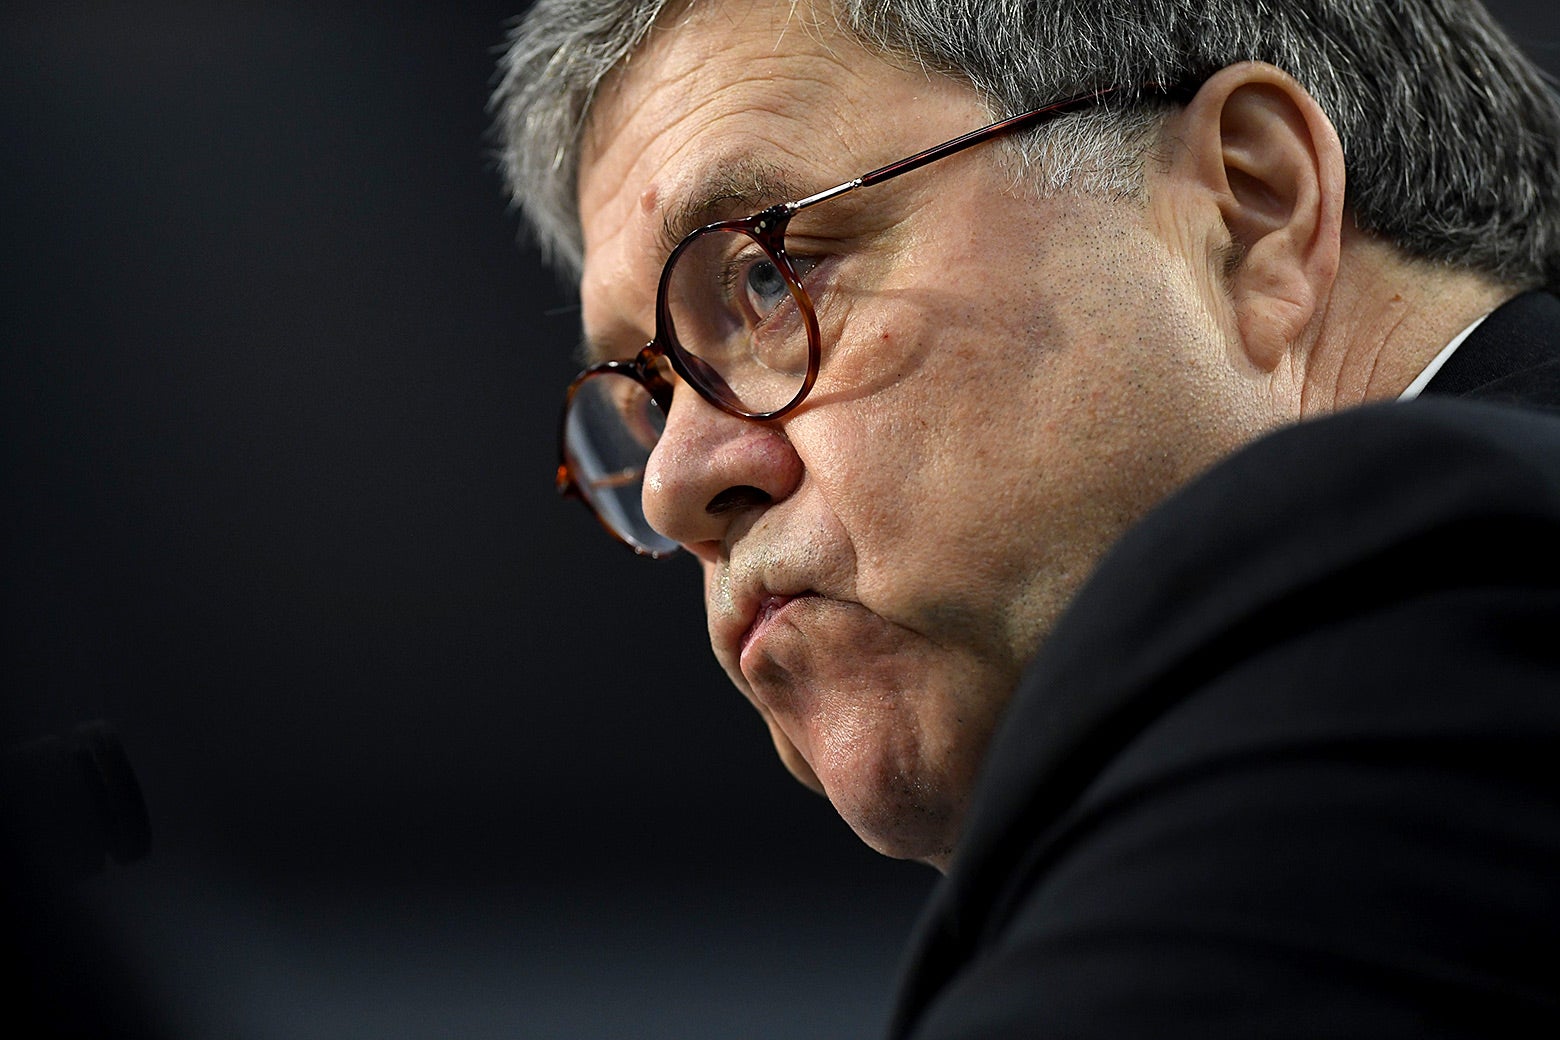 William Barr purses his lips, considers how best to spin his lies.